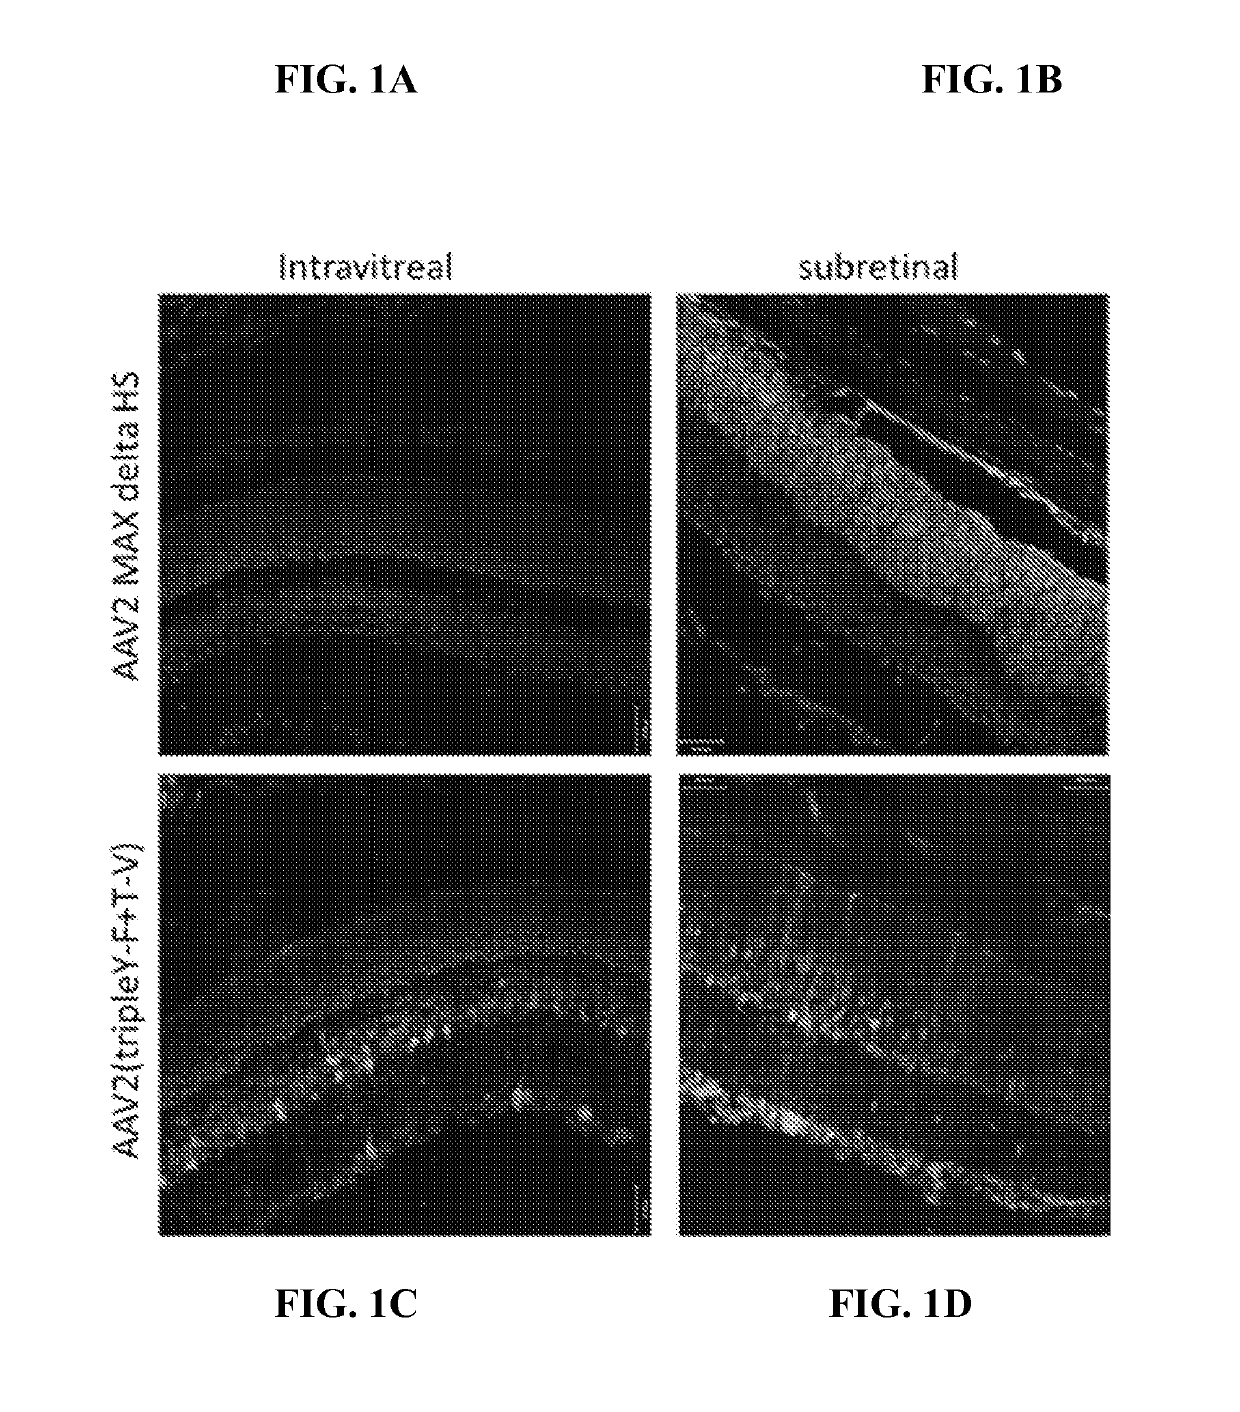 rAAV vectors and methods for transduction of photoreceptors and RPE cells